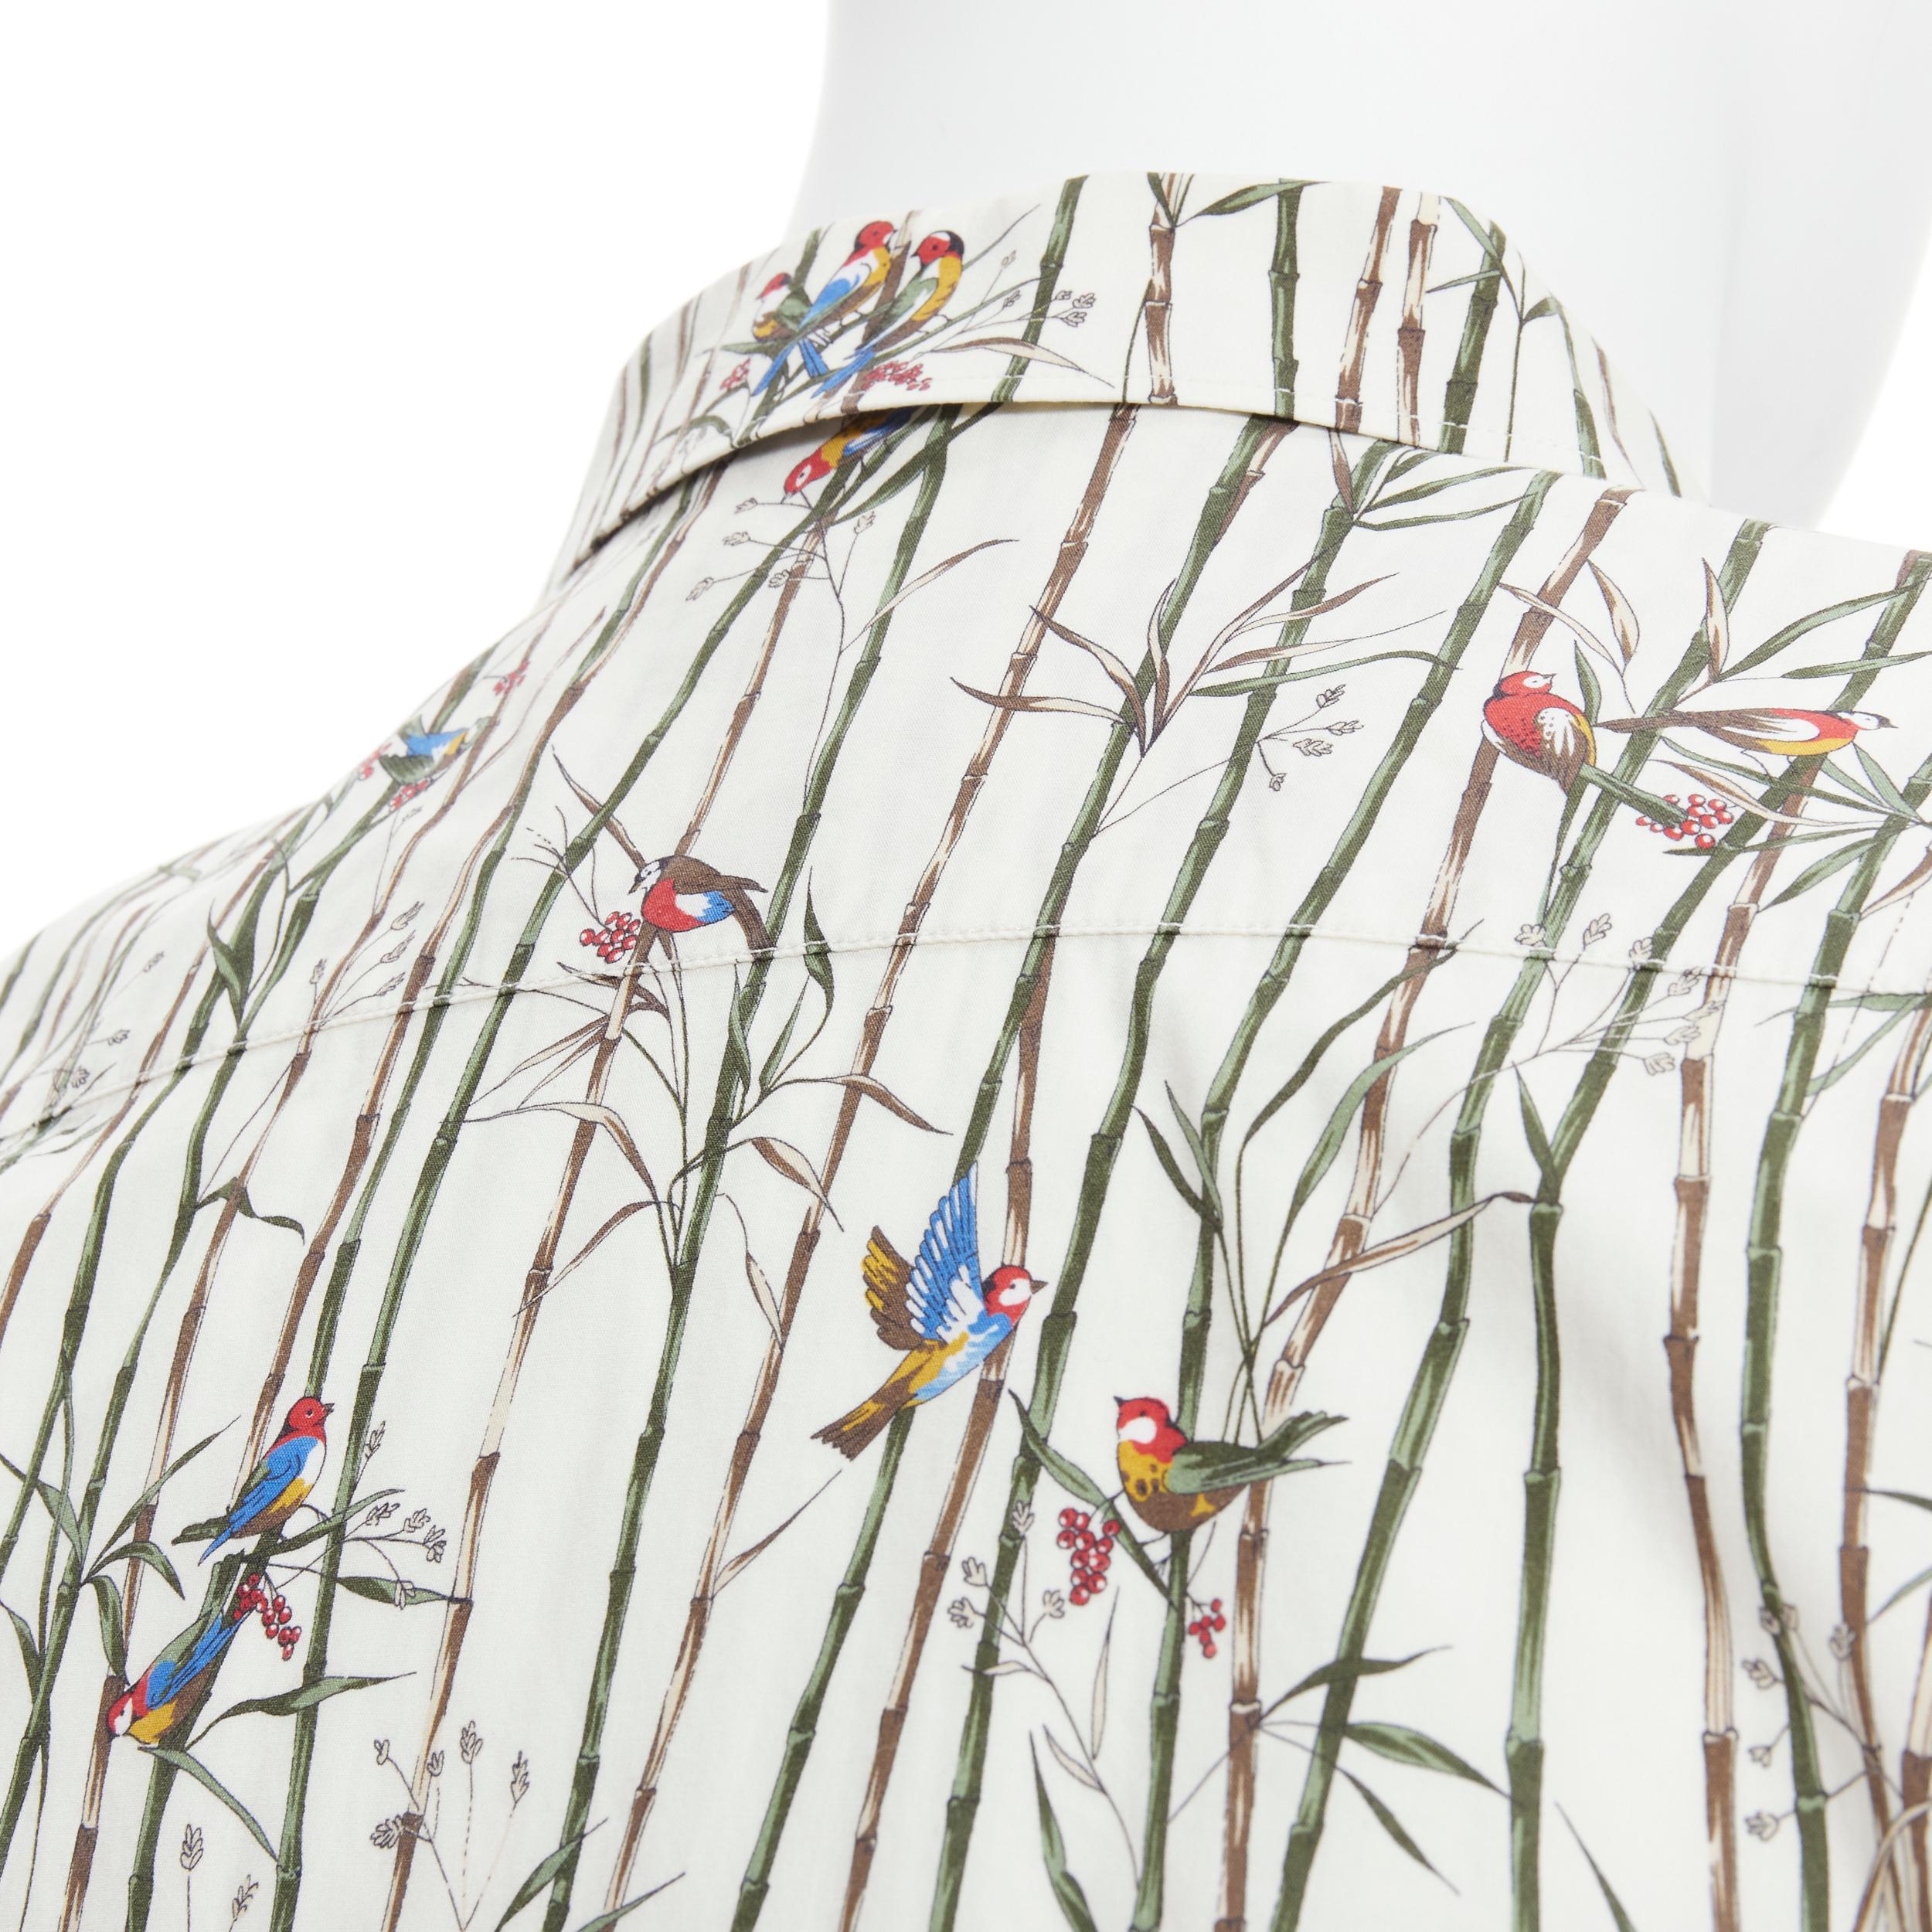 DOLCE GABBANA white sparrow bird bamboo print cotton shirt EU40 L 
Reference: TGAS/B01275 
Brand: Dolce Gabbana 
Material: Cotton 
Color: Multicolour 
Pattern: Floral 
Closure: Button 
Made in: Italy 

CONDITION: 
Condition: Excellent, this item was